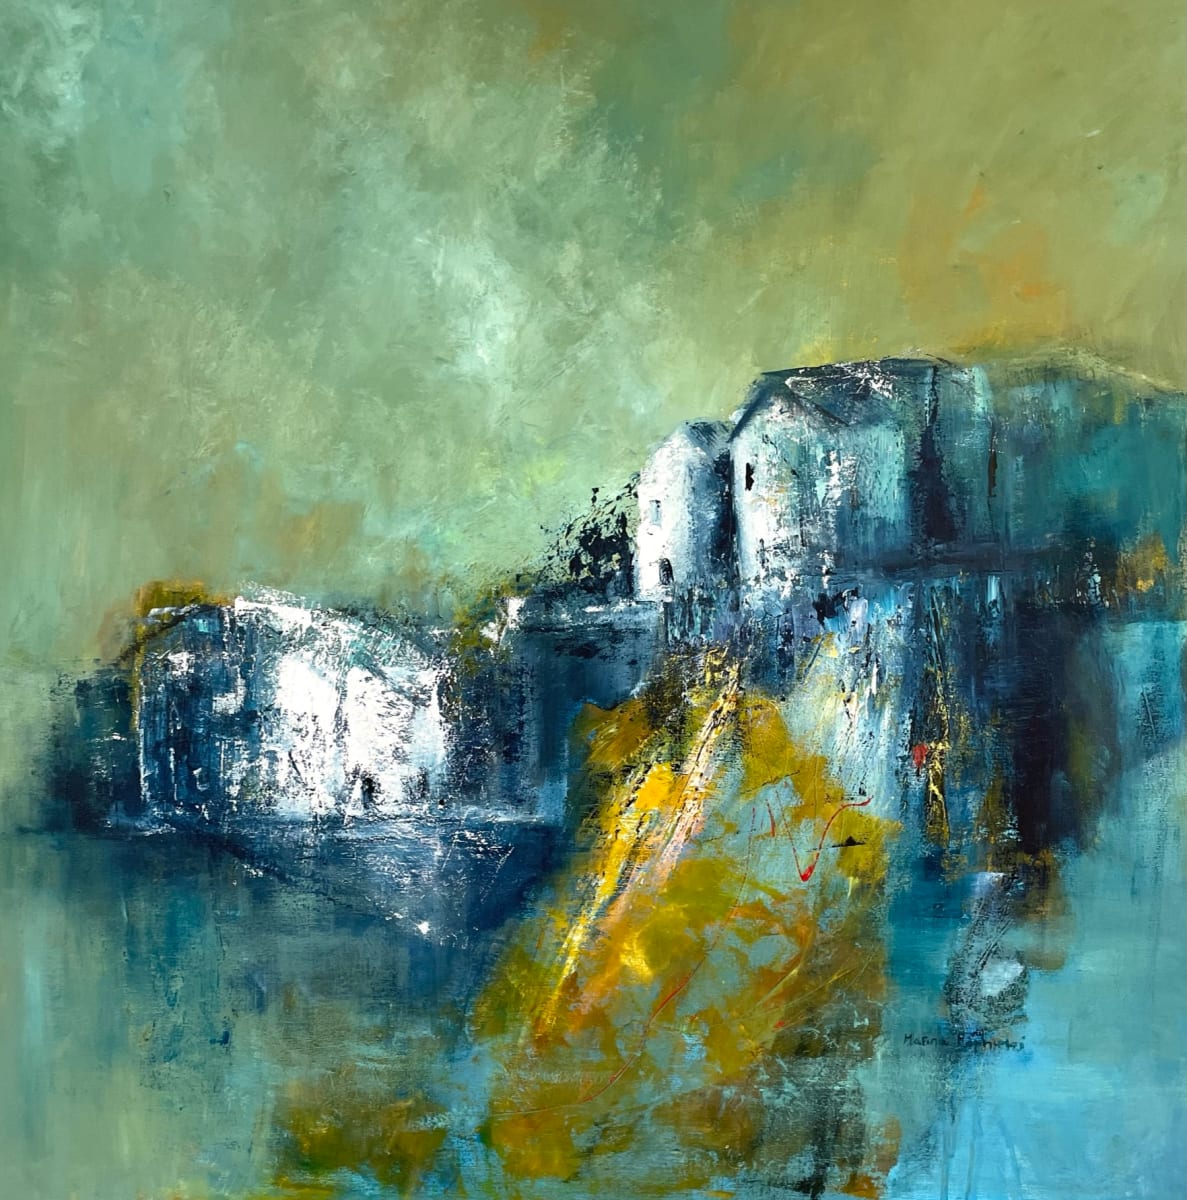 'Cliff Views’ by Marina Emphietzi  Image: Marina is well known for her evocative seascape paintings.
Her works depict strong emotions and intense energy while also telling a story. They serve as a metaphor for our passing through life and living in a world where materialism and technology are dominant; they convey feelings of memory, time, happiness, sorrow, and even "nostos" (the Greek word for "homecoming").
Her paintings, created with vigour, have playful textures and a modern art style. 

They bring up faded memories of being near water, the sound of rumbling waves, and the sensation of a warm breeze across skin. Her artworks, a metaphor for the transient human experience, suggest that we flow through life, ever-changing.
Marina wants her art to relate to our human desire to hold onto our memories across time.
